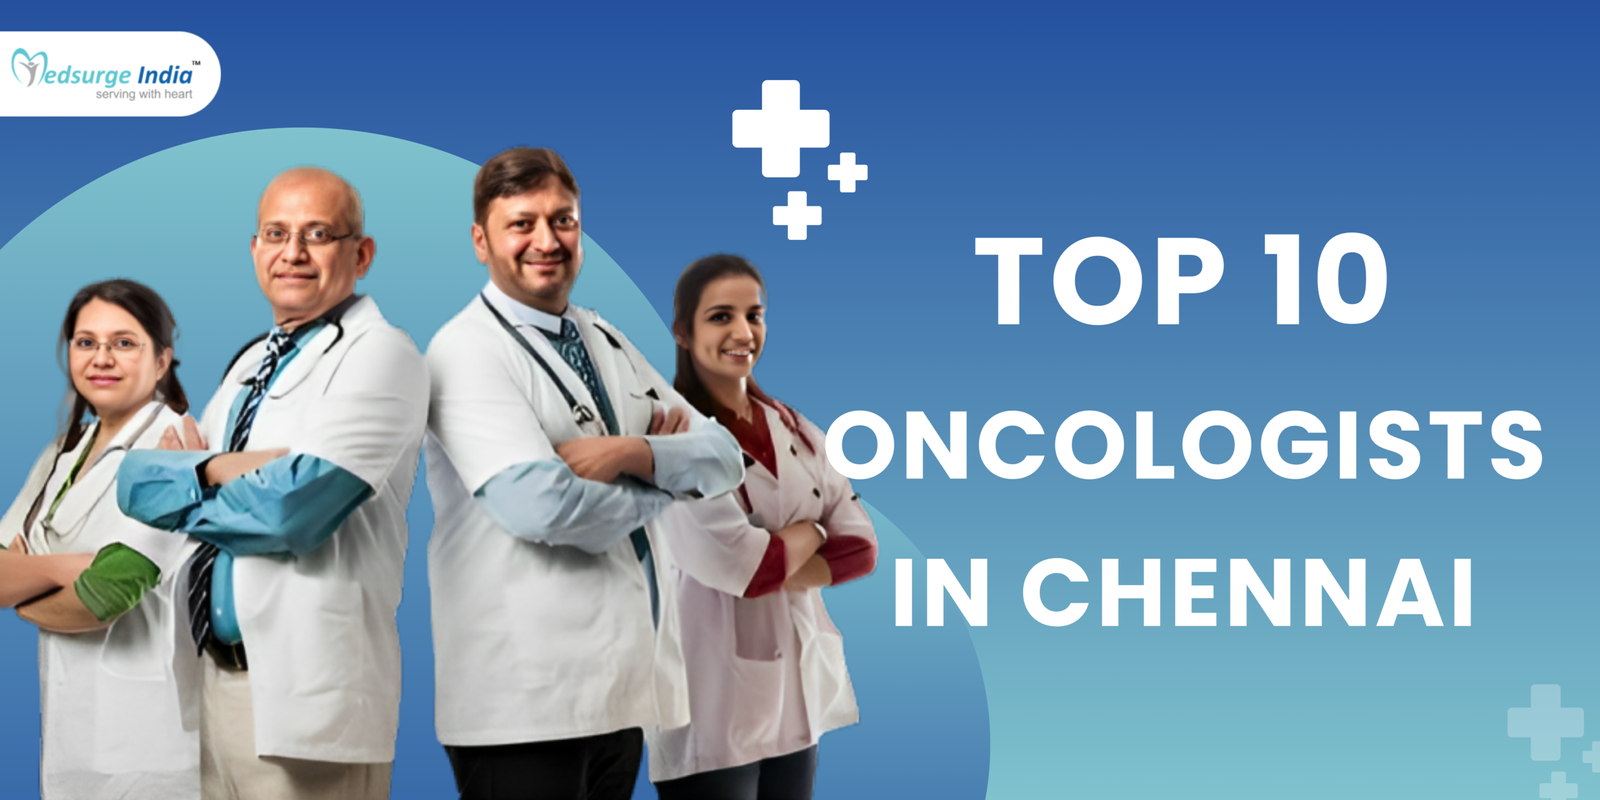 Top 10 Oncologists in Chennai